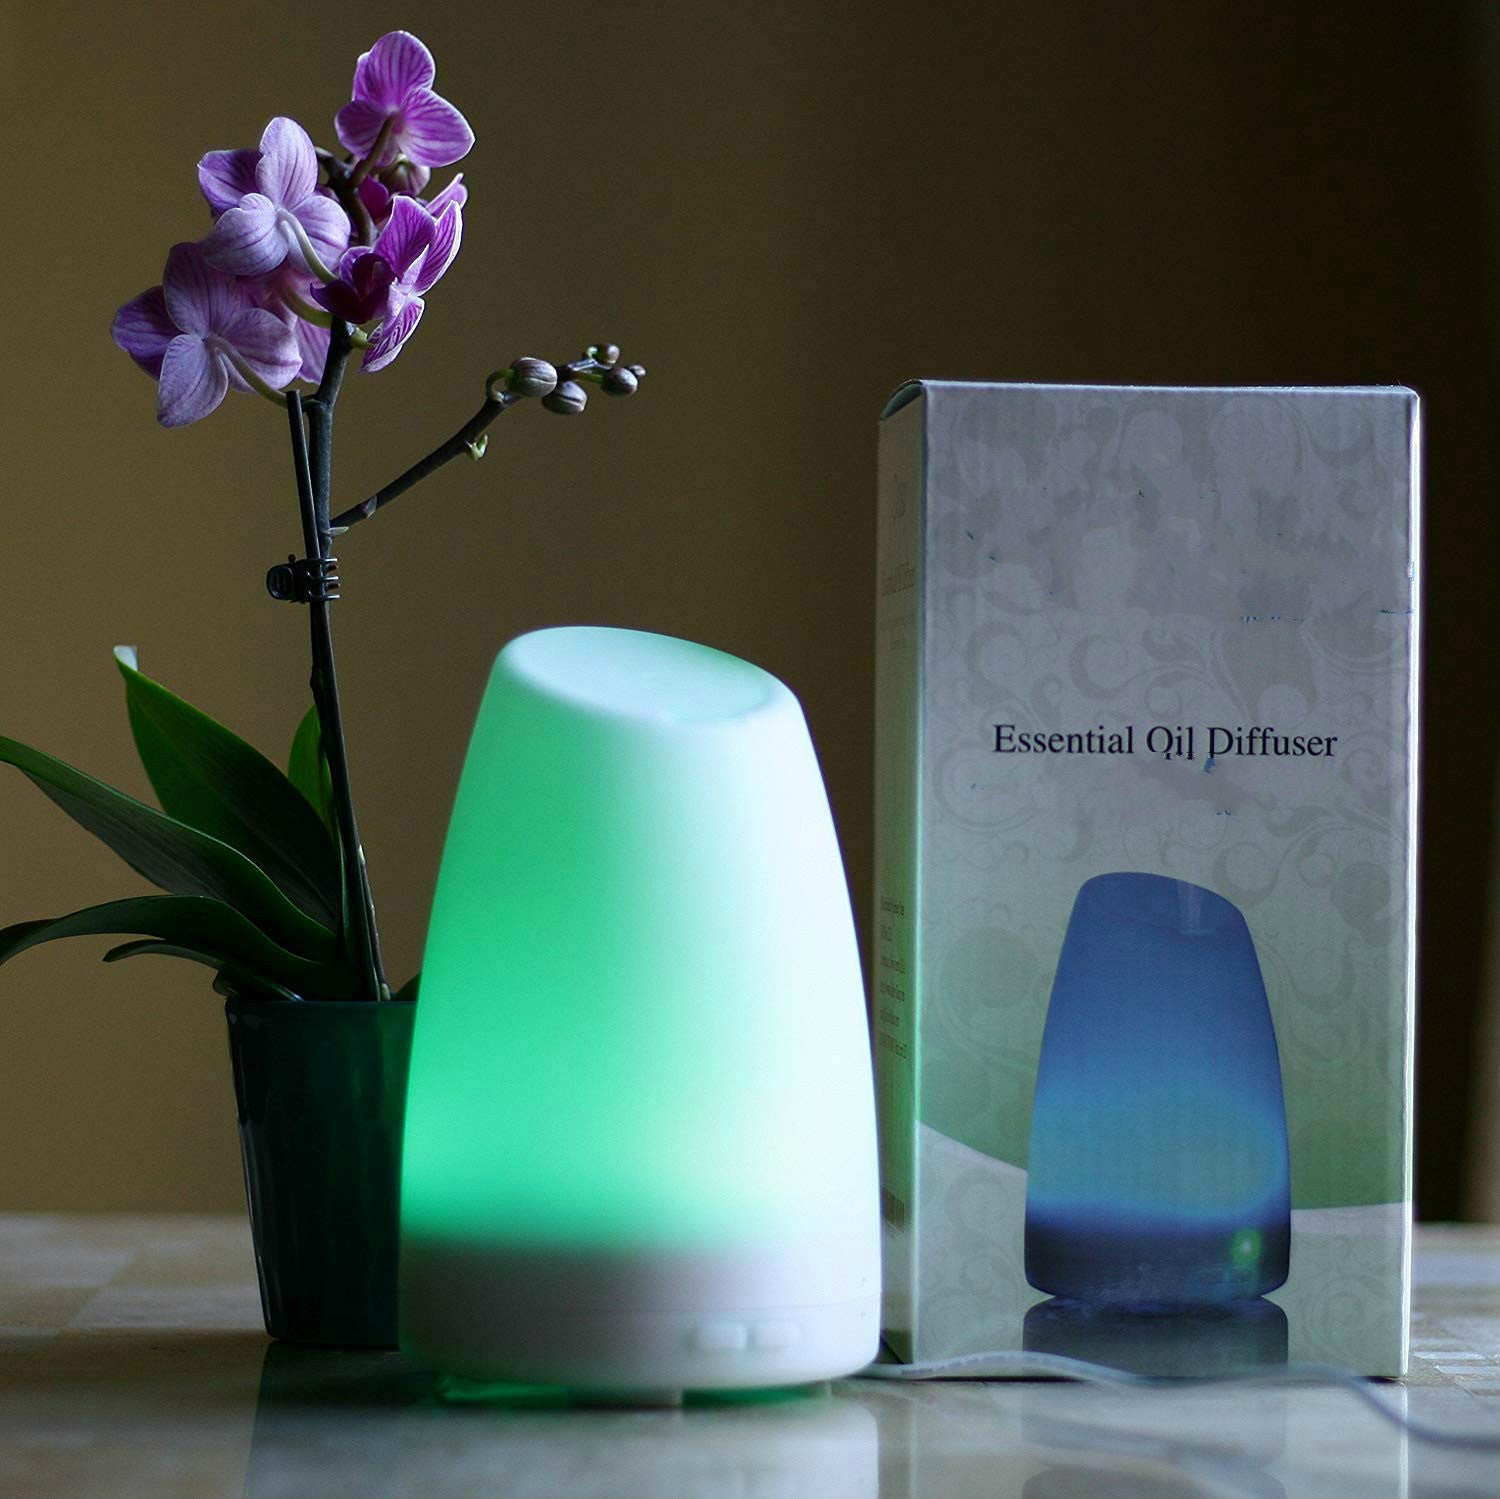 Aromatherapy Essential Oil Diffuser by appreciis - Best Electric Ultrasonic Diffuser for Your Scented Oils (Eucalyptus, Lavender, etc.)Best Candle Burner Replacement - Your Purchase Supports Charity -(White)